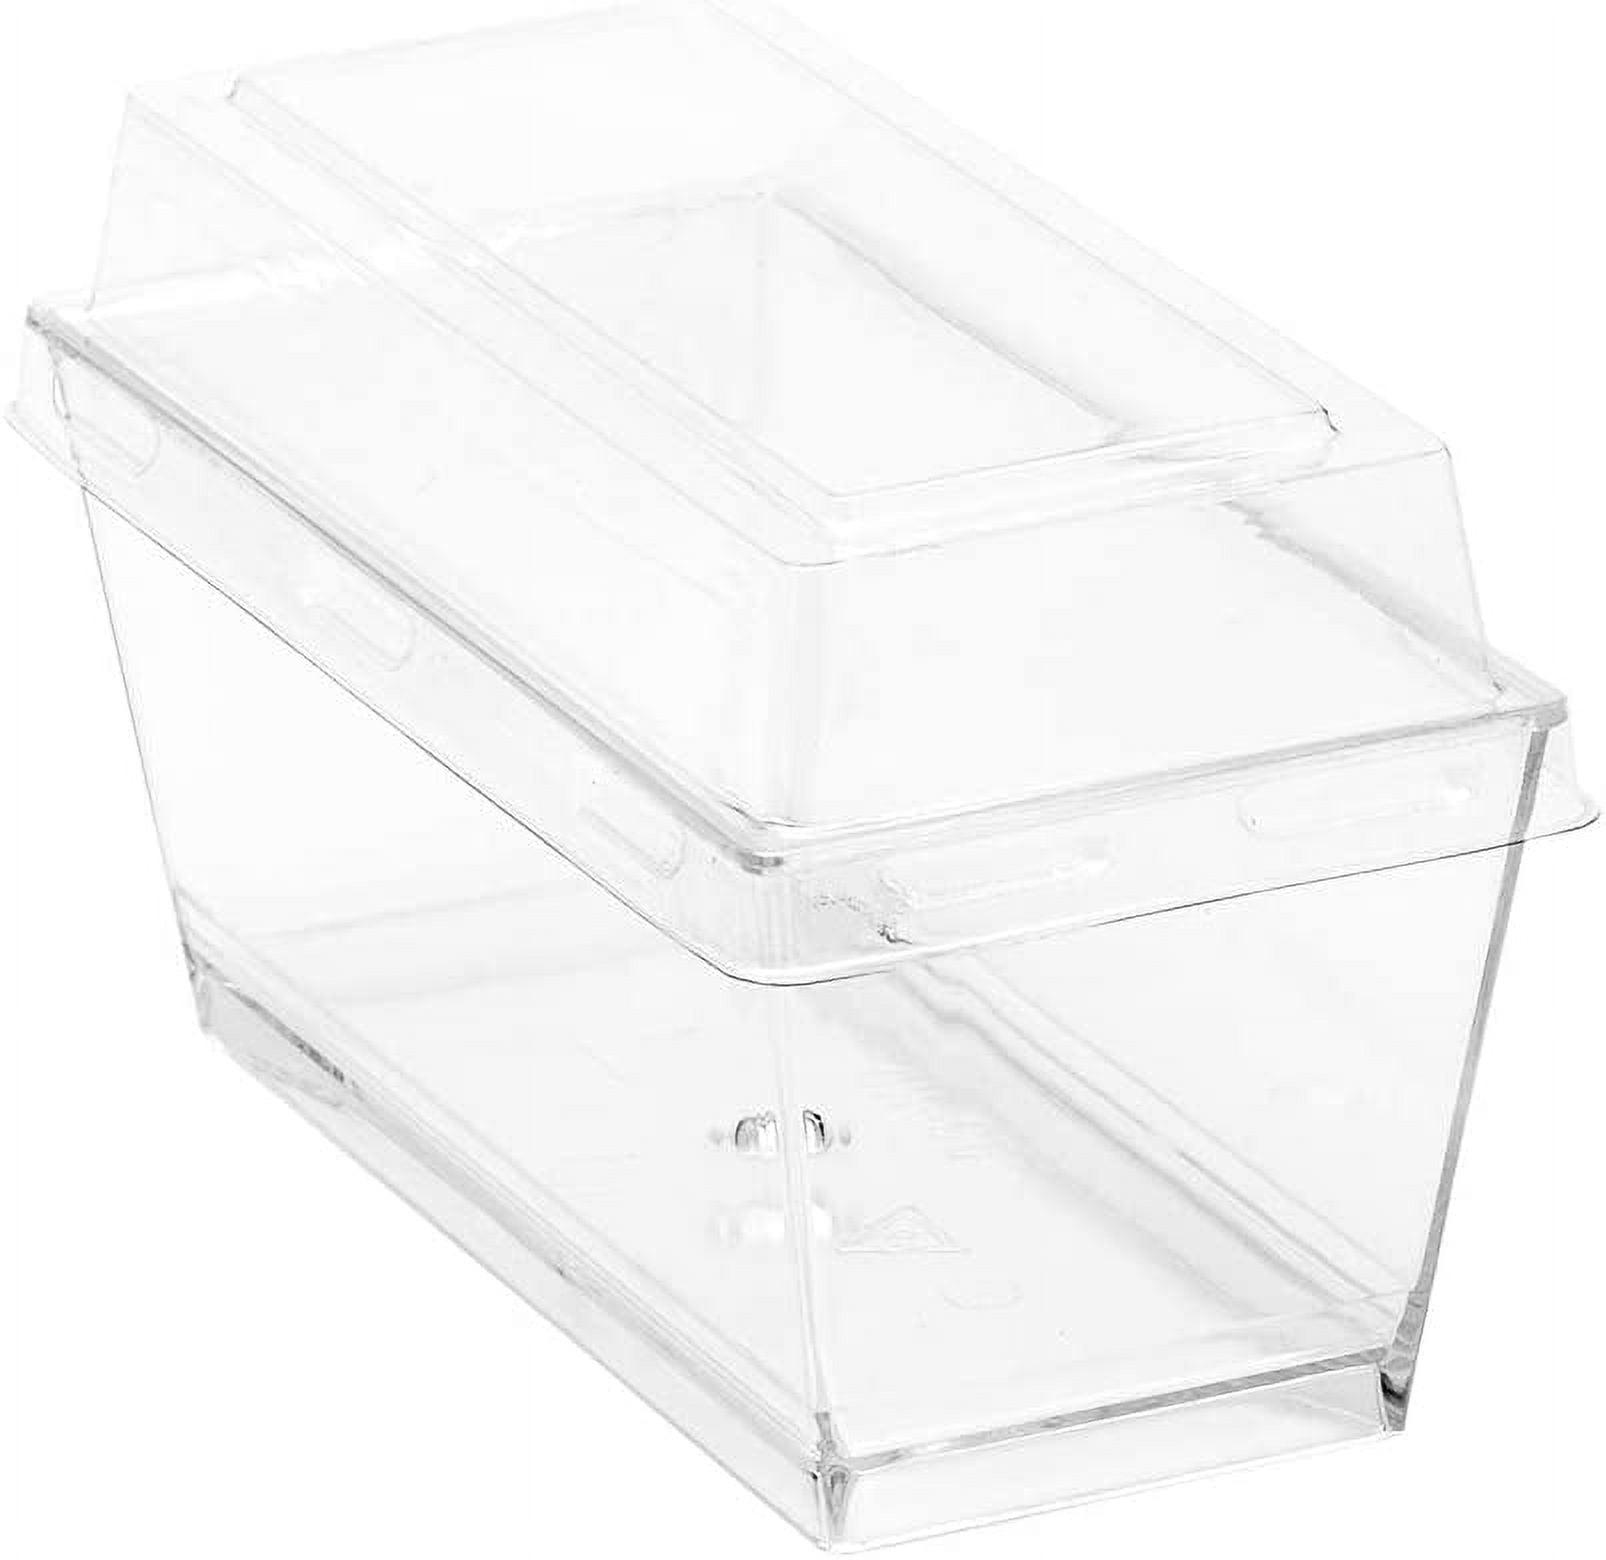 Rectangular Container, Clear with Lid, Frosted - 13058